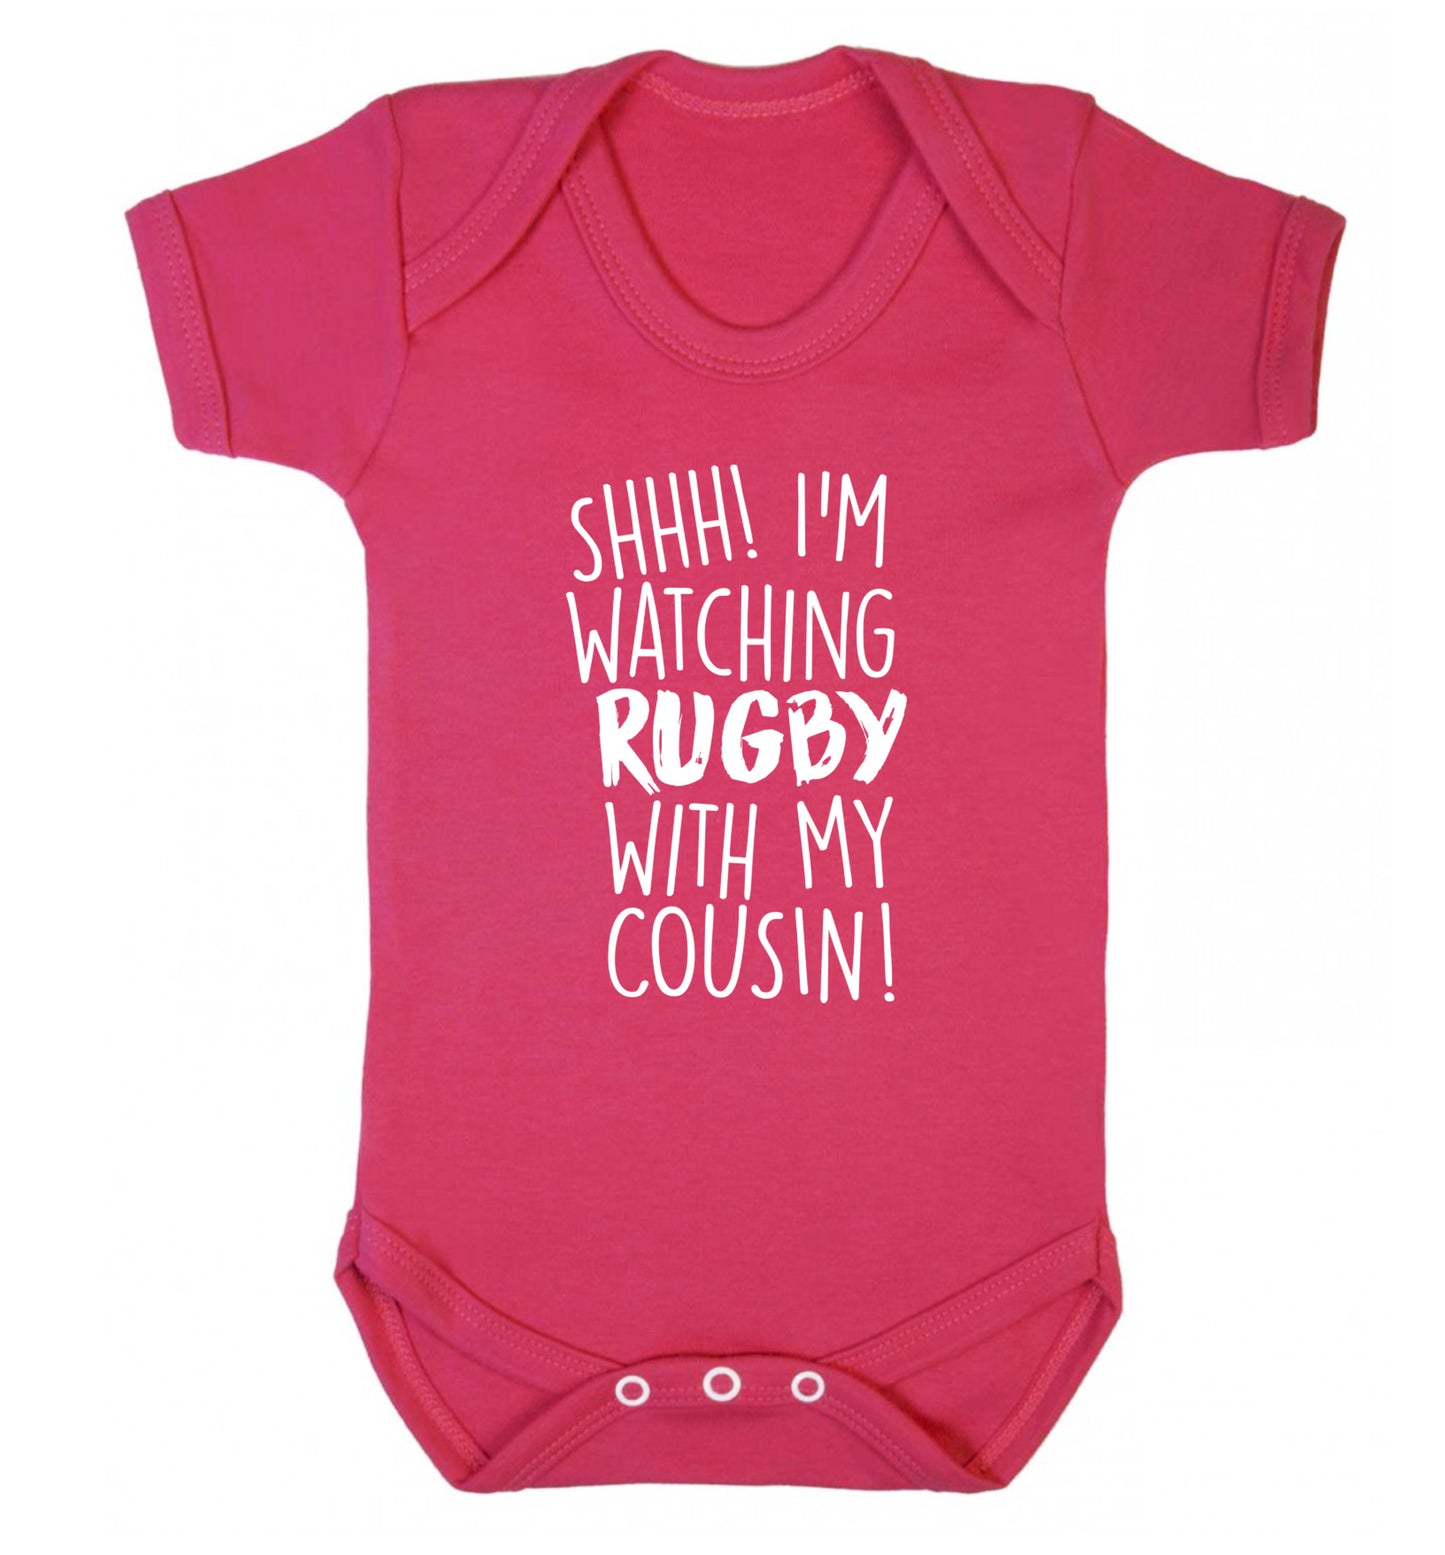 Shhh I'm watching rugby with my cousin Baby Vest dark pink 18-24 months